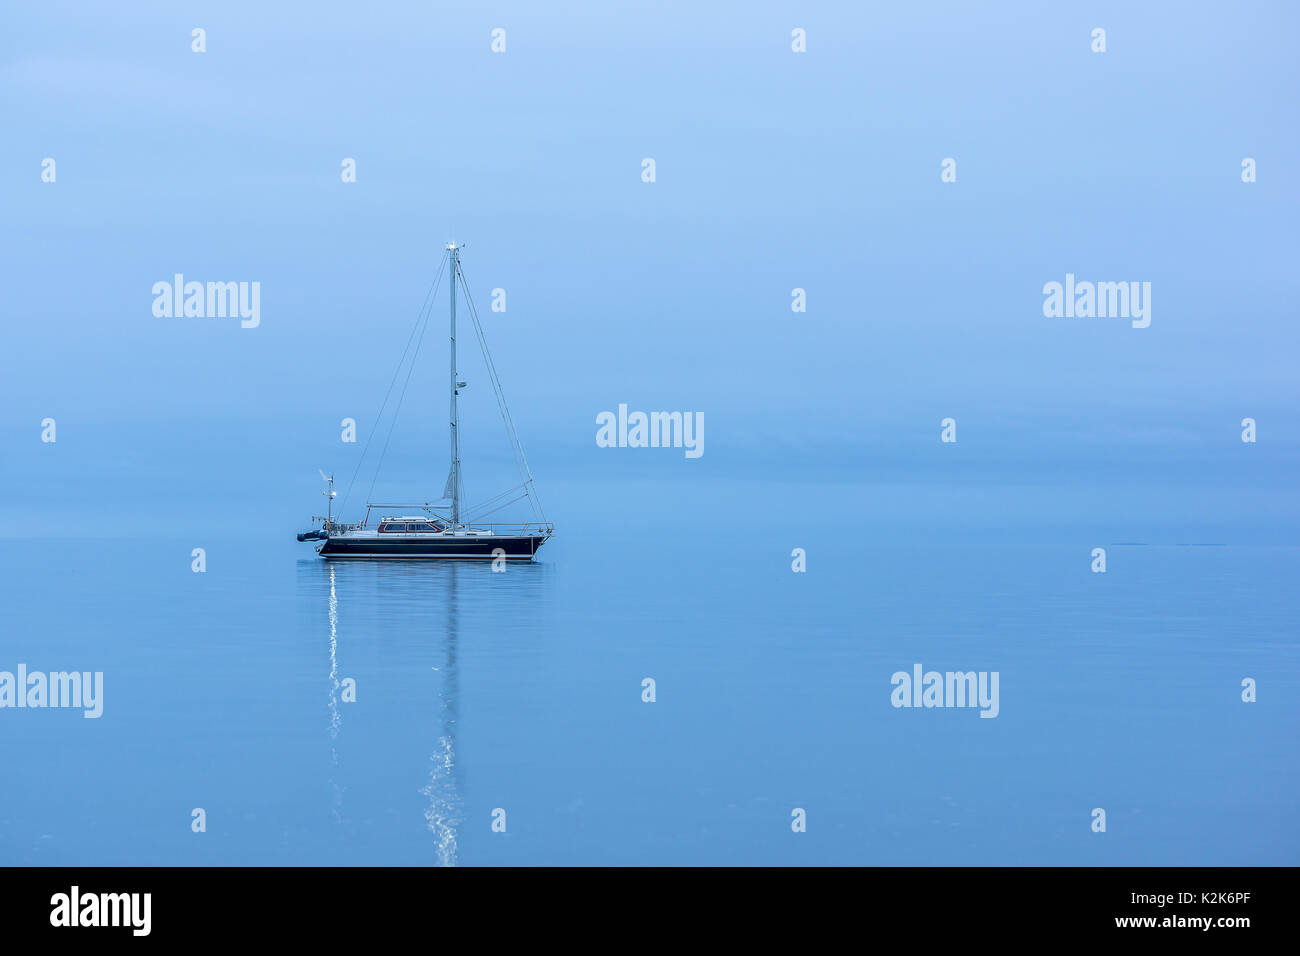 Lonely Black sailing boat in the ocean before sunrise, reflections in blue hour Stock Photo